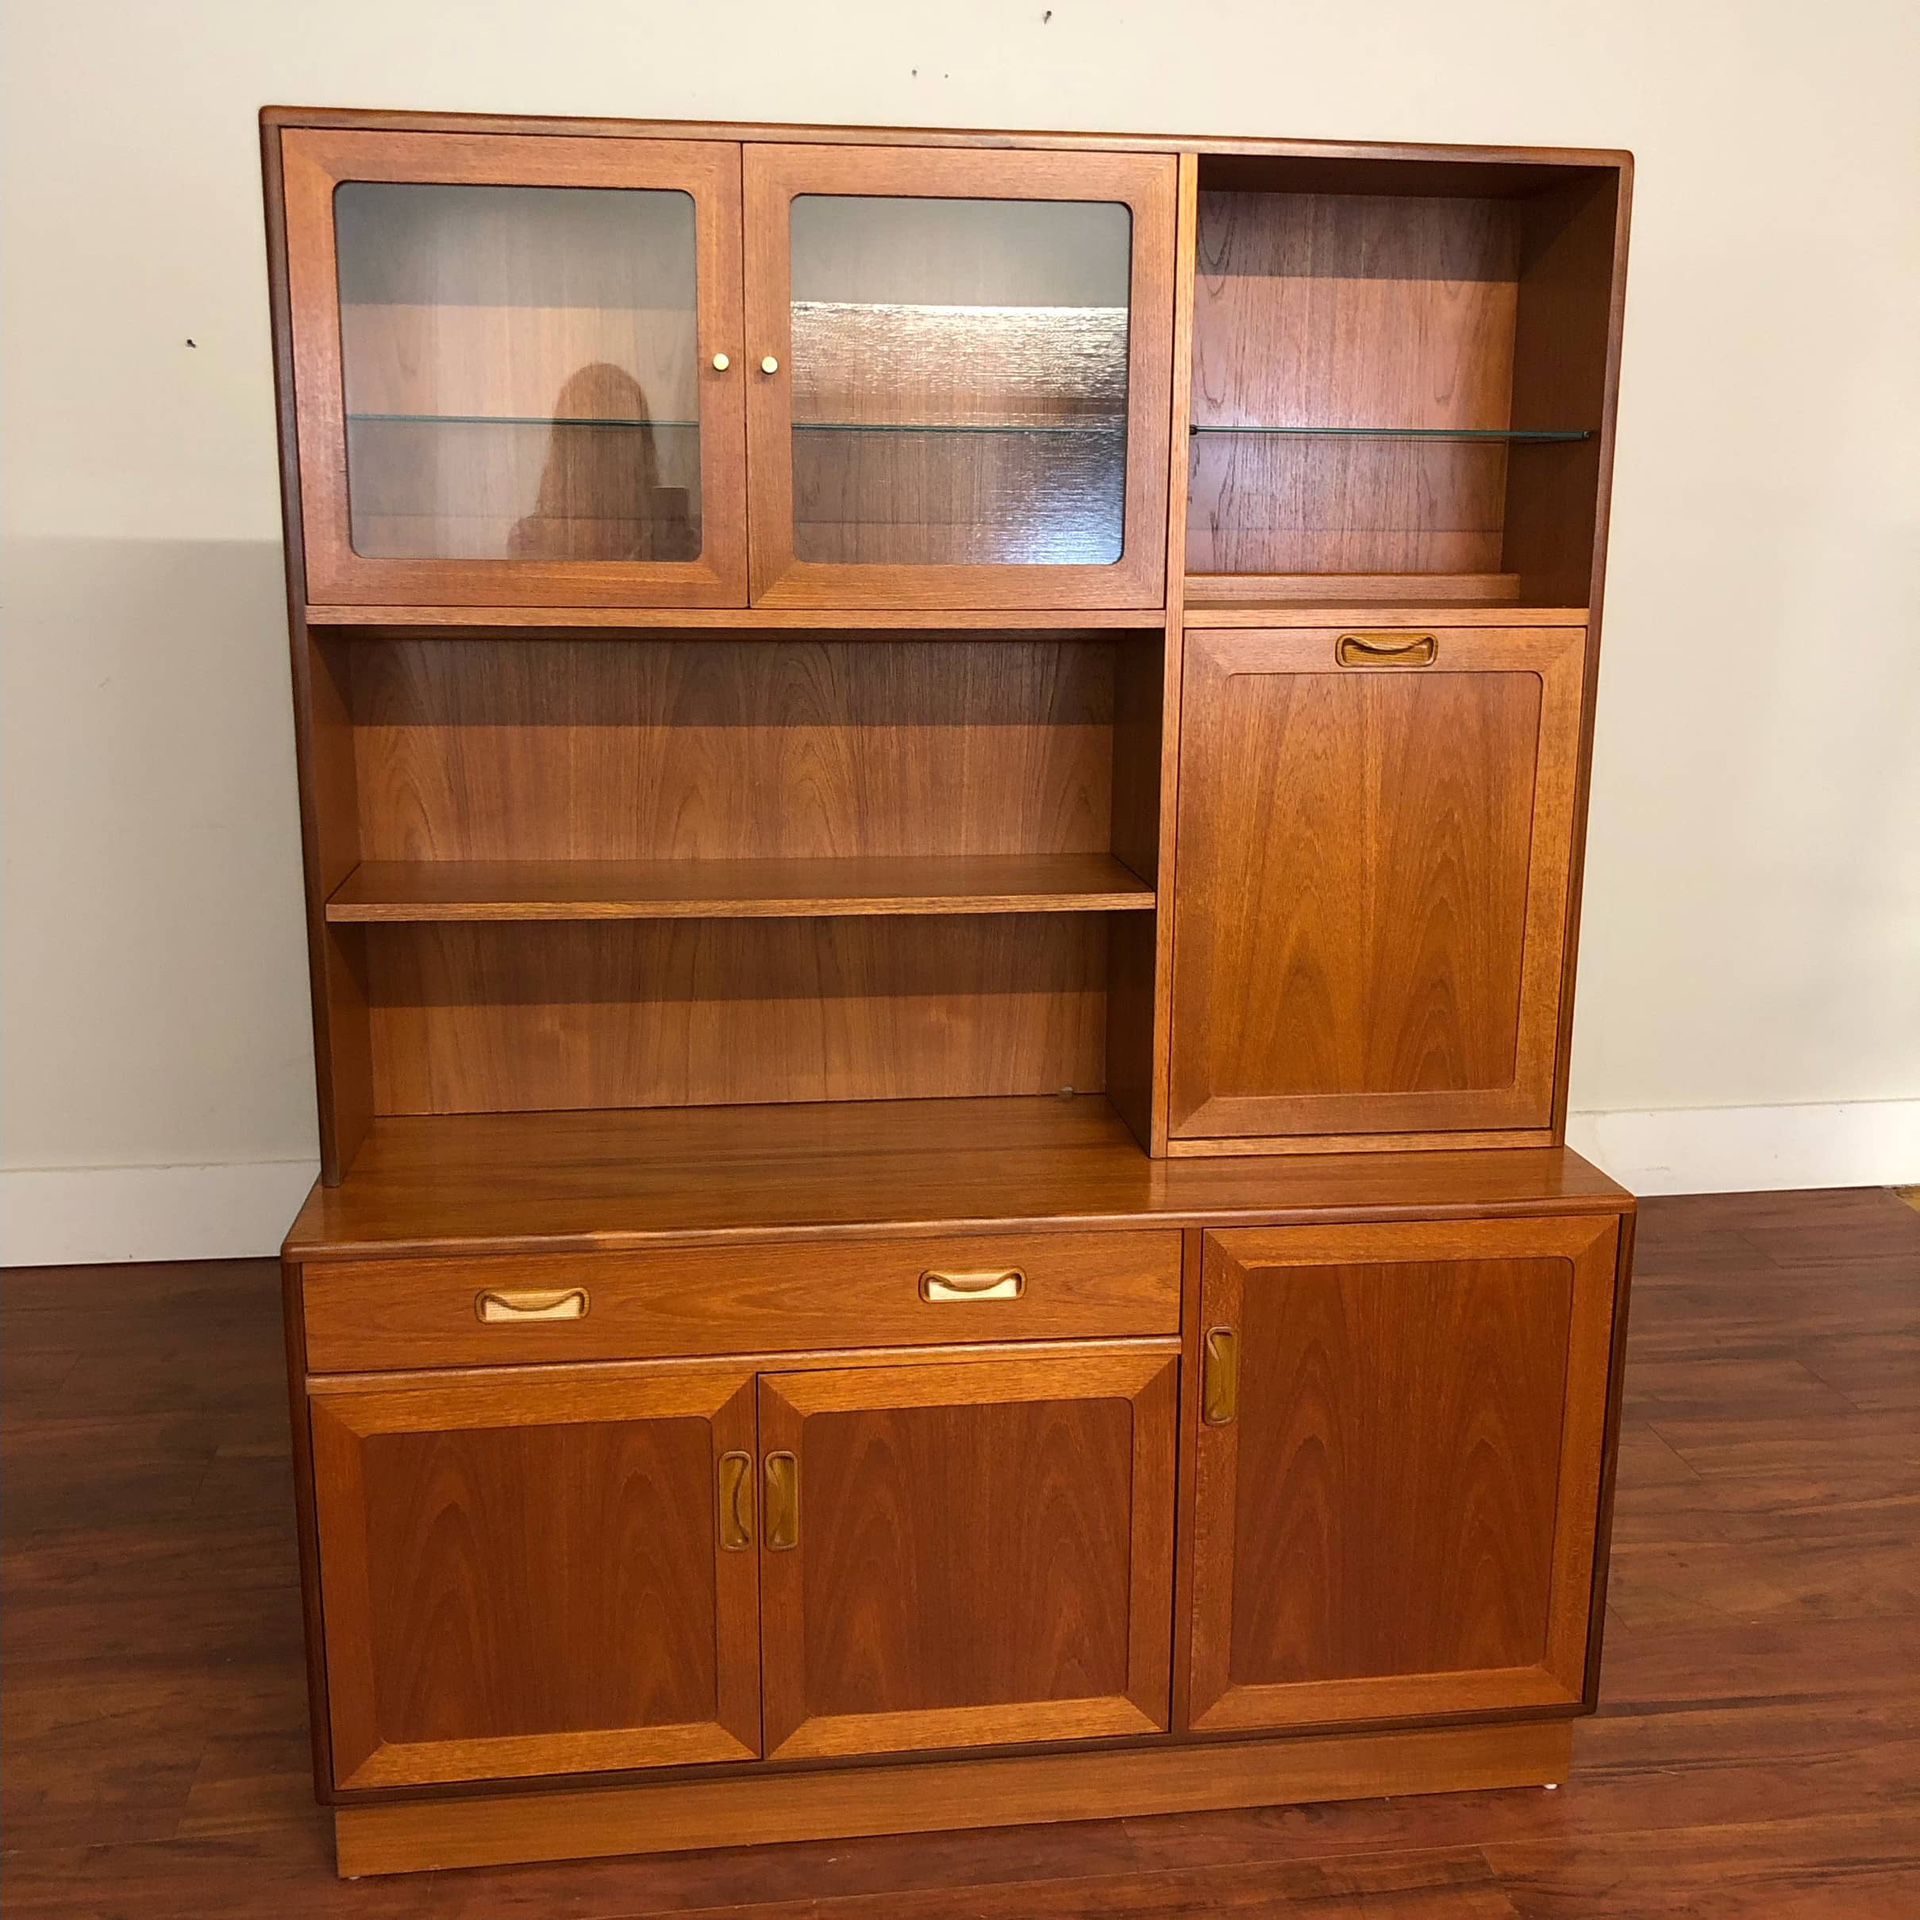 Vintage Teak Sideboard / Hutch / Bar - Many More Items In Stock!